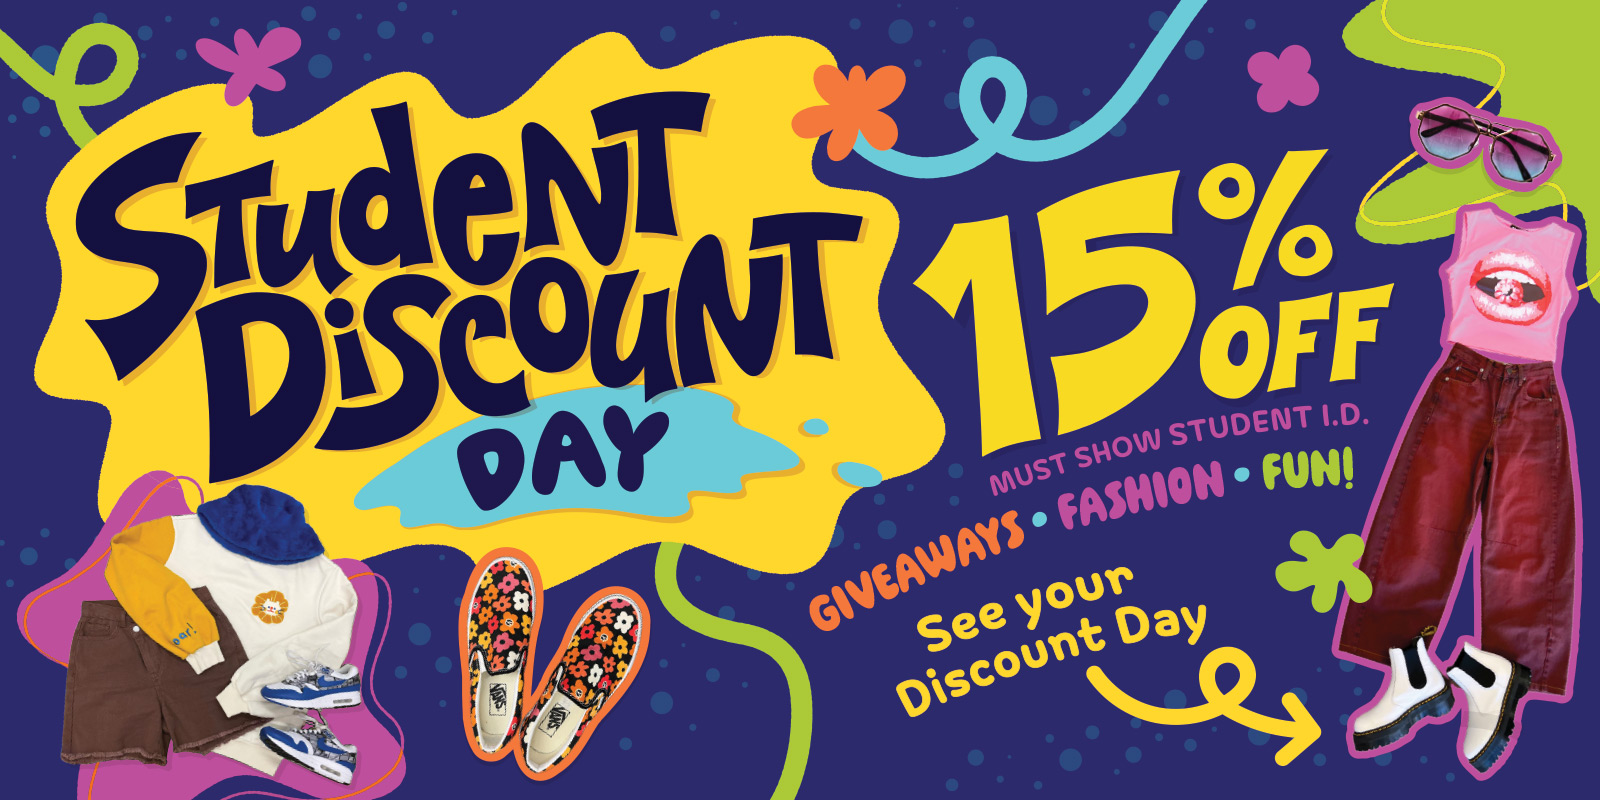 STUDENT DISCOUNT DAY: 15% OFF, Must show student I.D. | Giveaways-Fashion-Fun! See your Discount Day. [Cool School Fits]